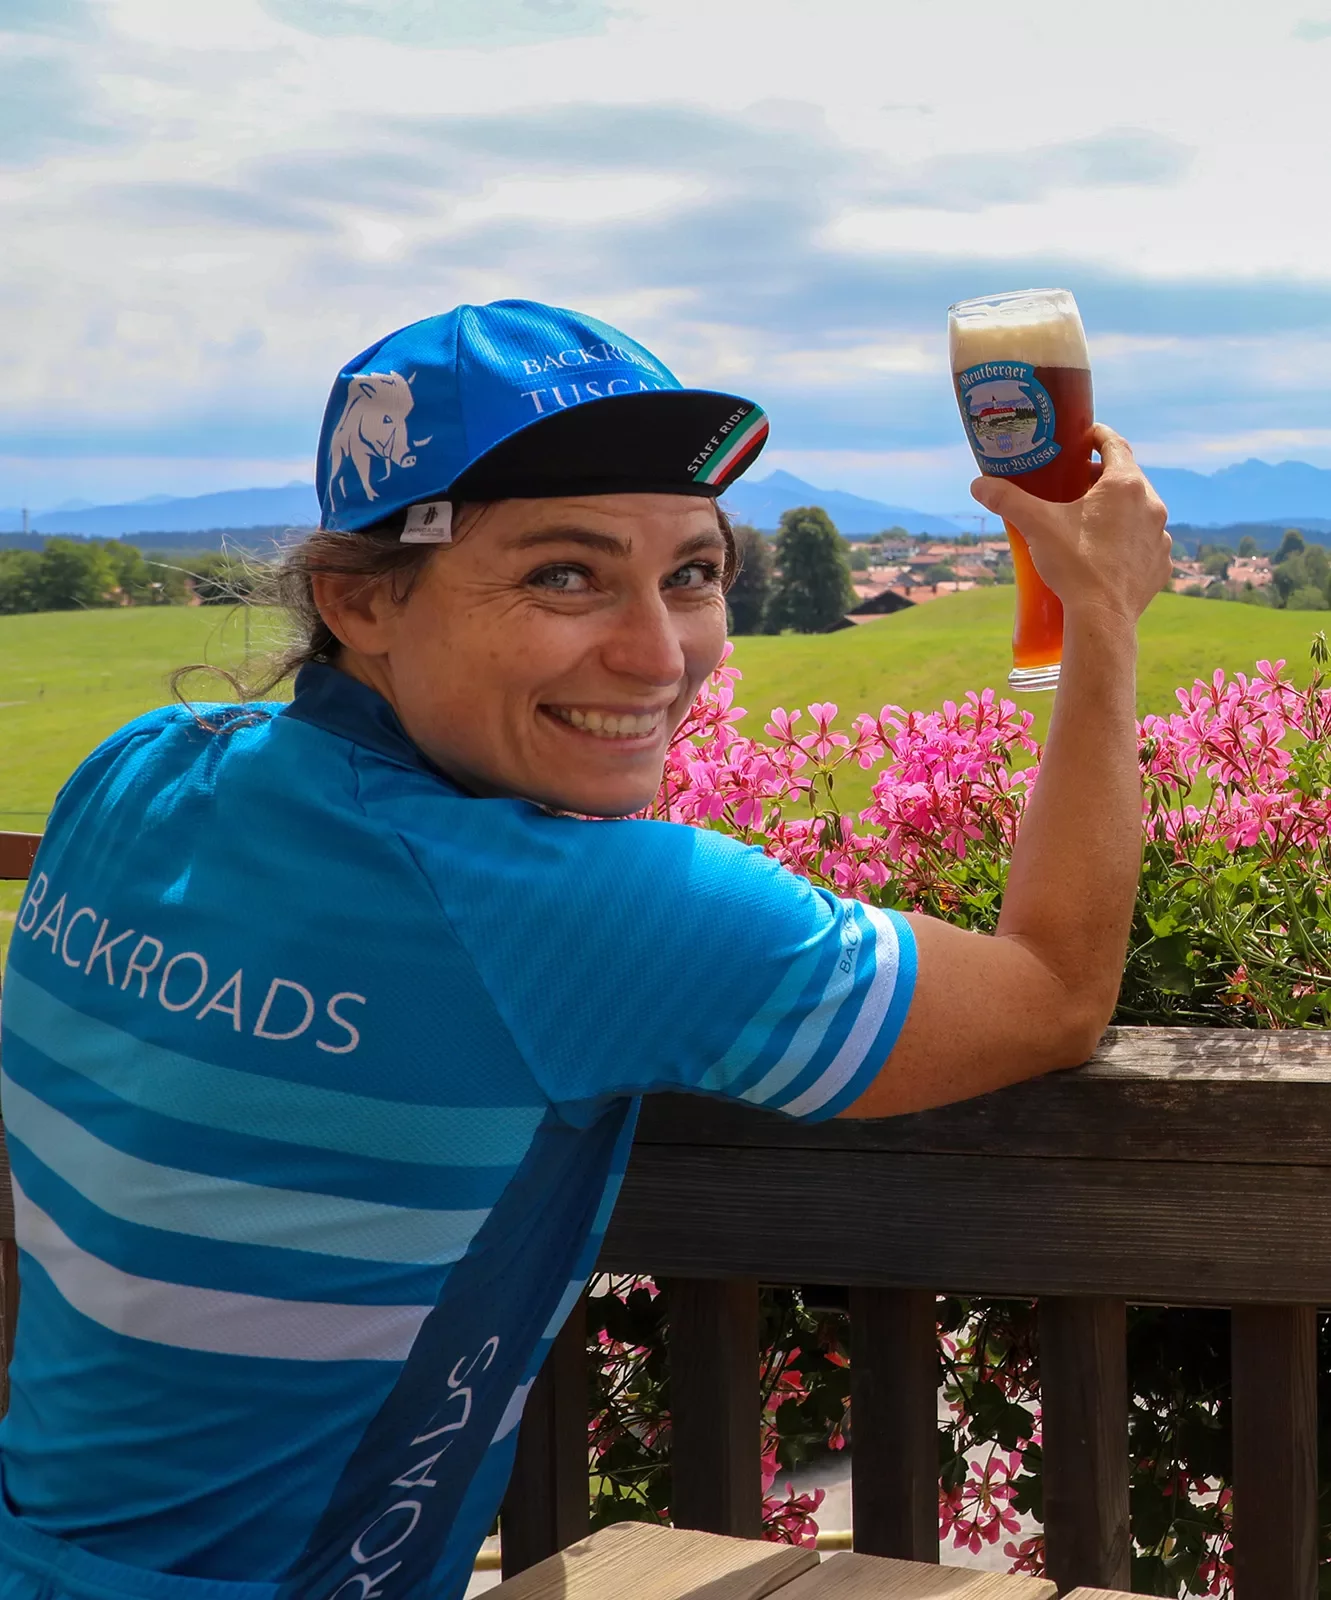 Backroads leader posing with pint of beer.